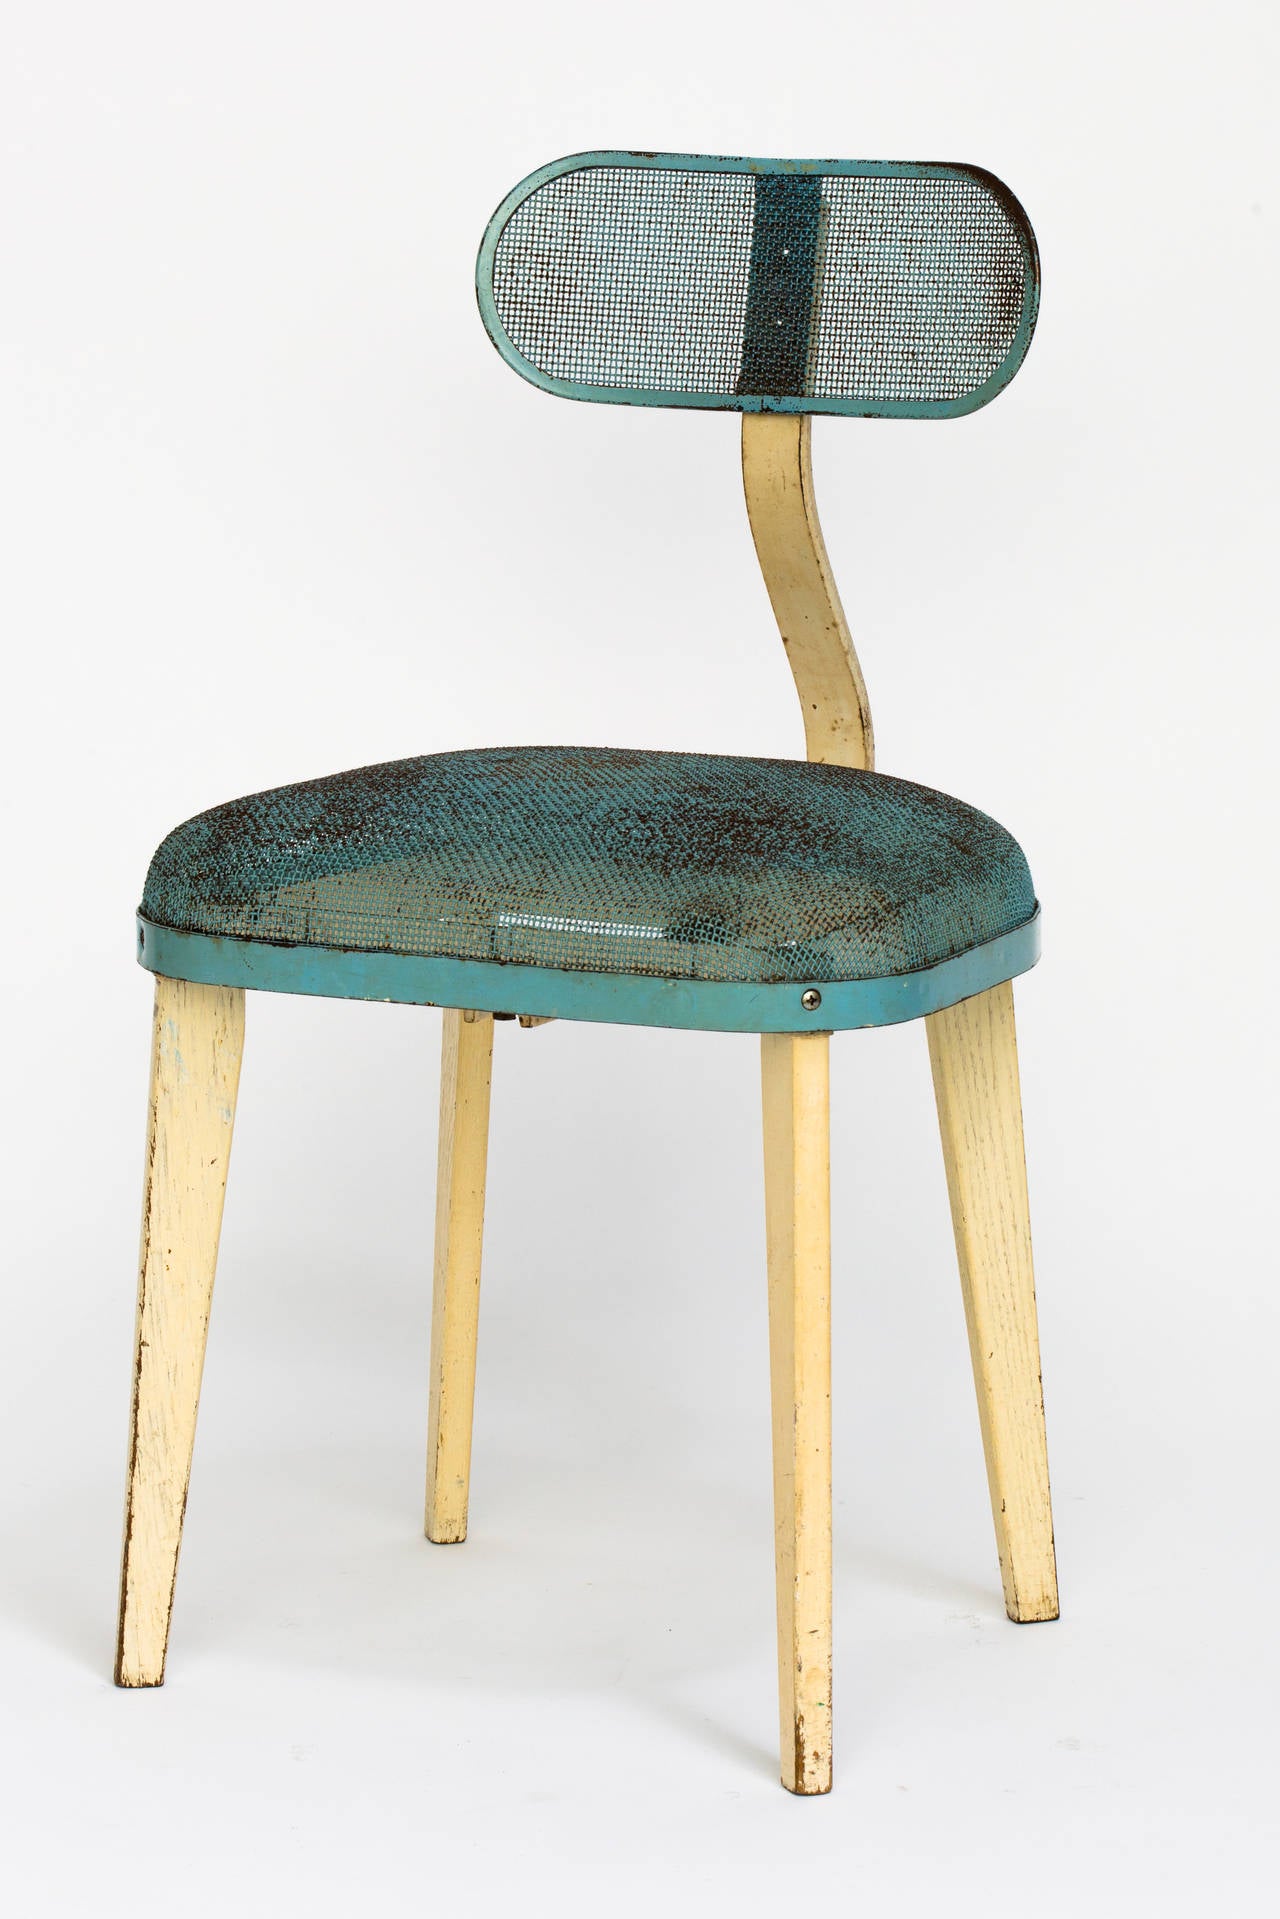 Industrial style chair in blue and beige enameled steel in the manner of Jean Prouve.
Adjustable back and wood legs.